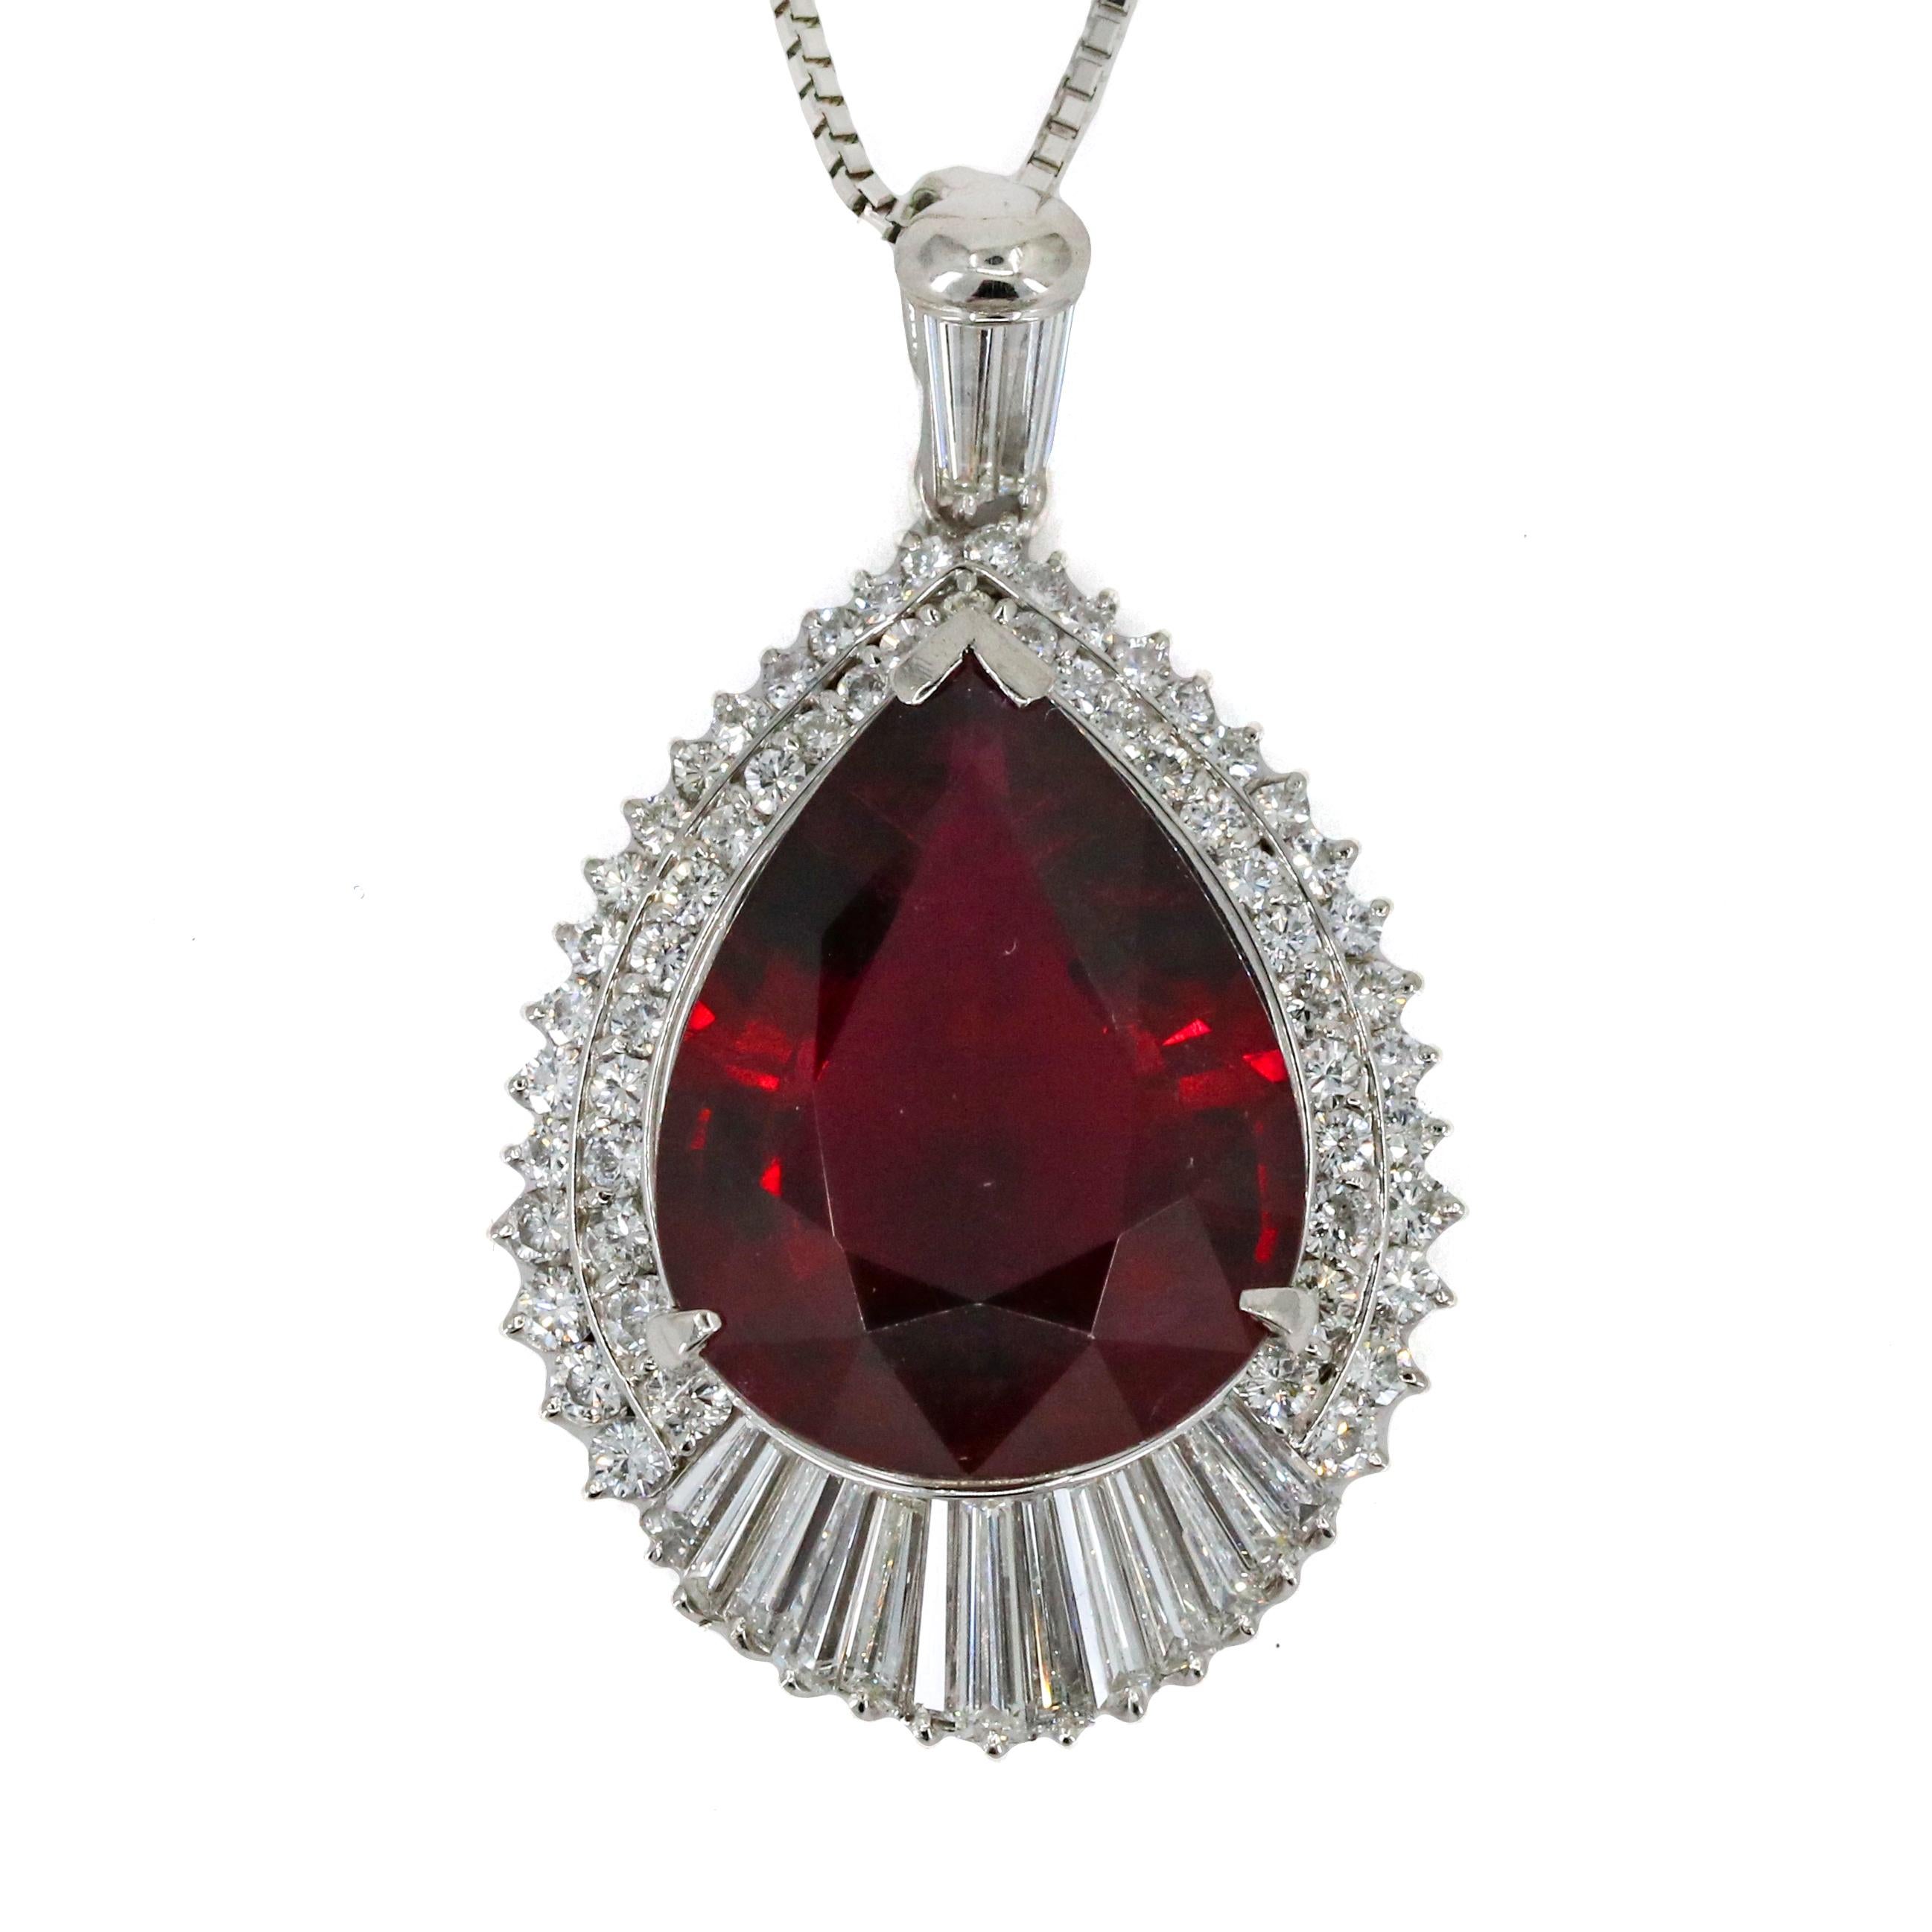 Rubellite Tourmaline and diamond pendant necklace in platinum. The pendant has a large pear-cut rubellite at the center that weighs 14.80 carats surrounded by numerous near colorless baguette and round cut diamonds. Adjustable box chain. 

Length,